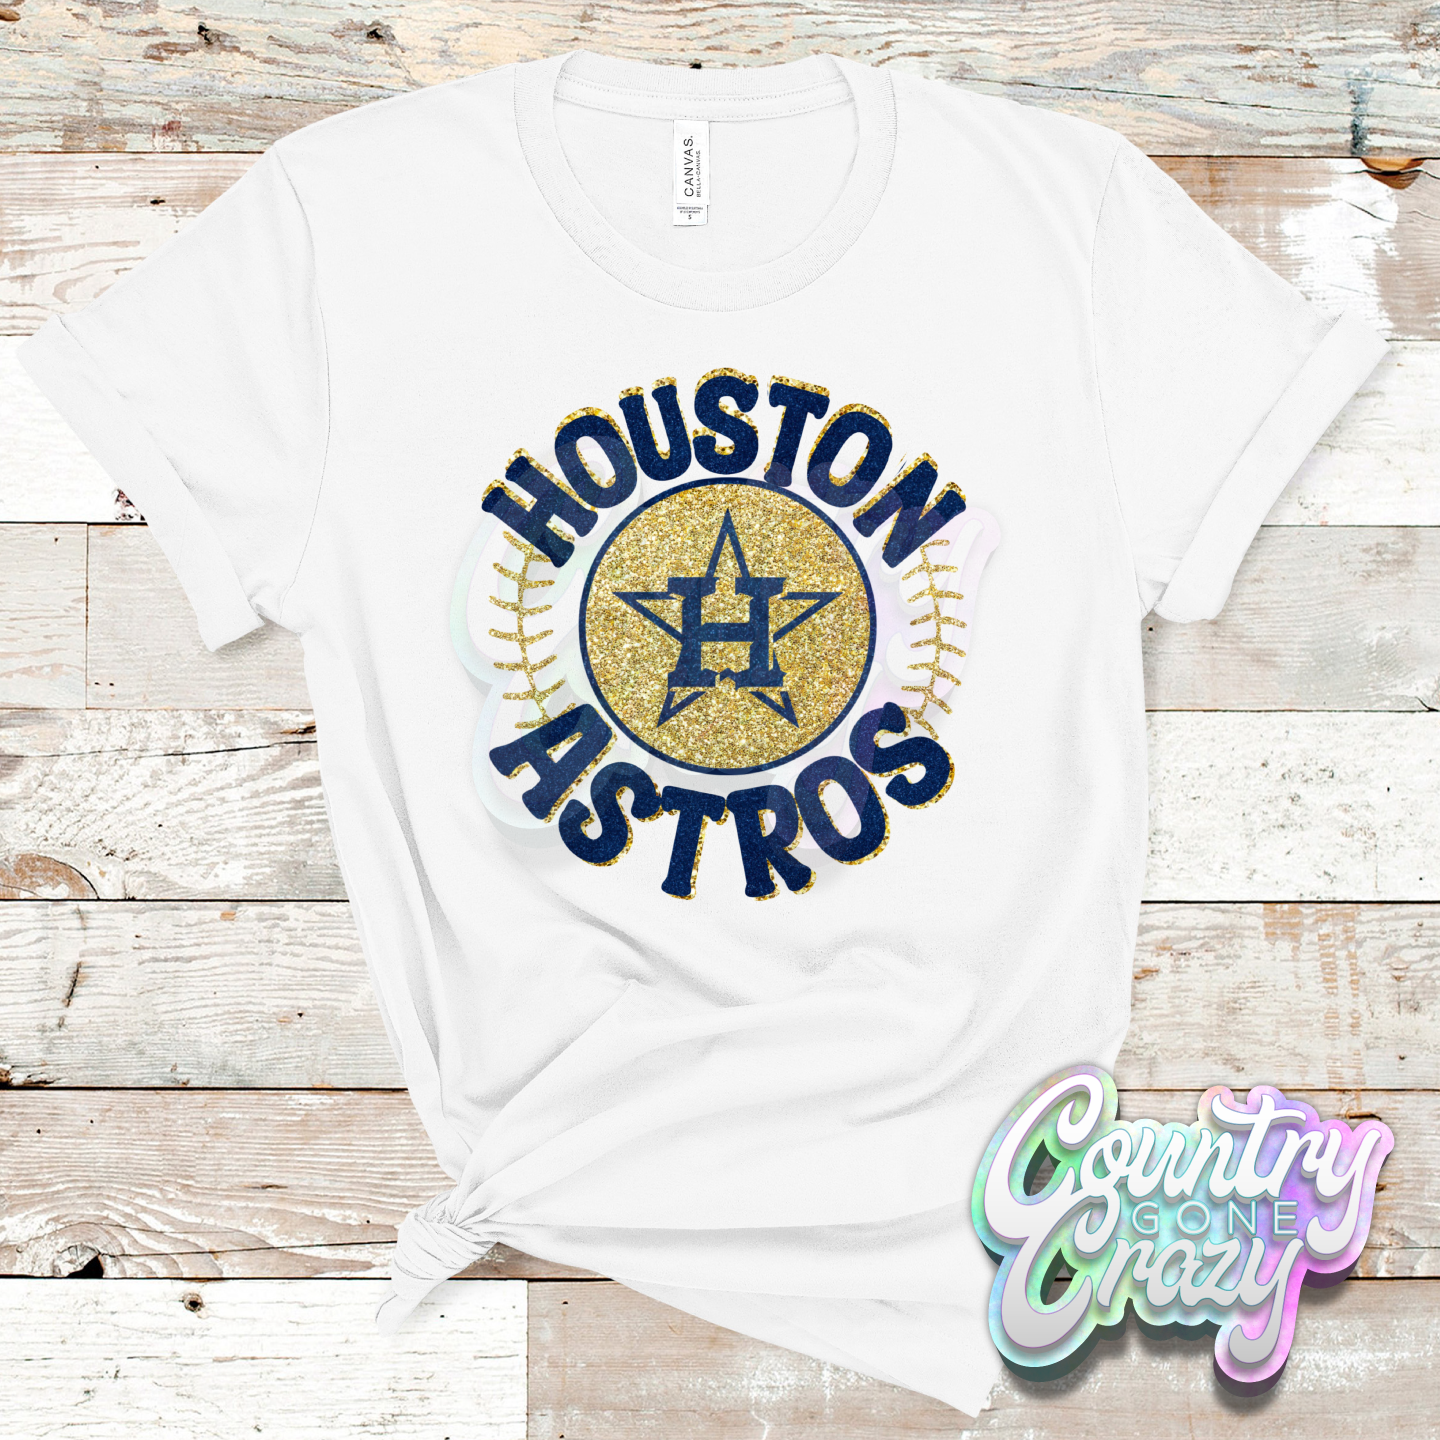 Houston Astros Personalized baseball jersey,. hotnew,, full printed jersey